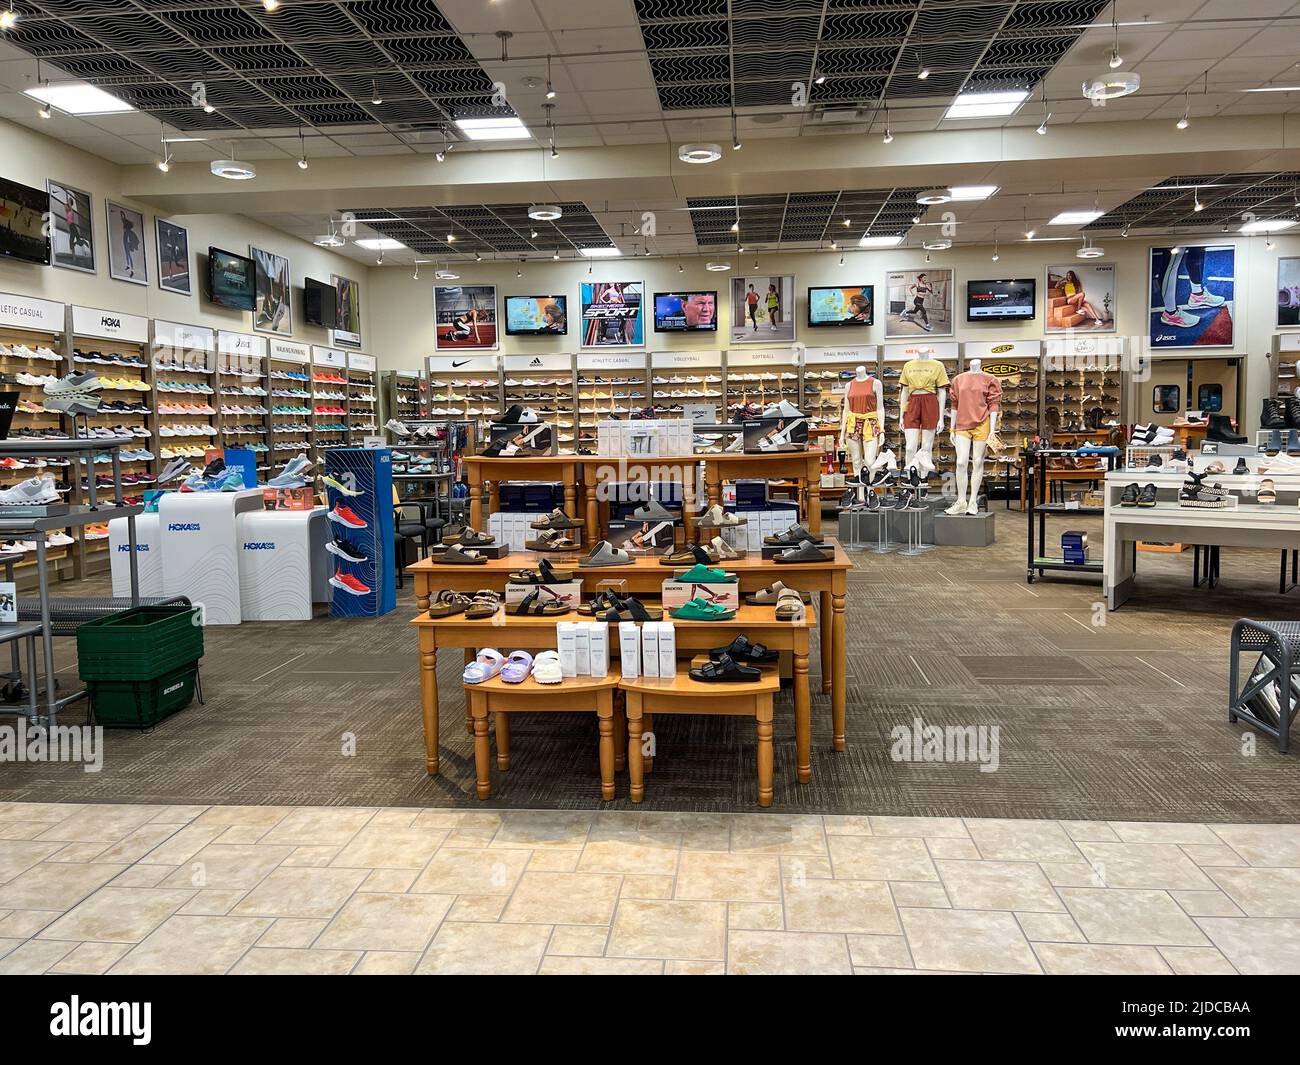 Springfield, IL USA - May 2, 2022: A display of Womens shoes for sale at the Scheels Sporting Goods store in Springfield, Illinois. Stock Photo